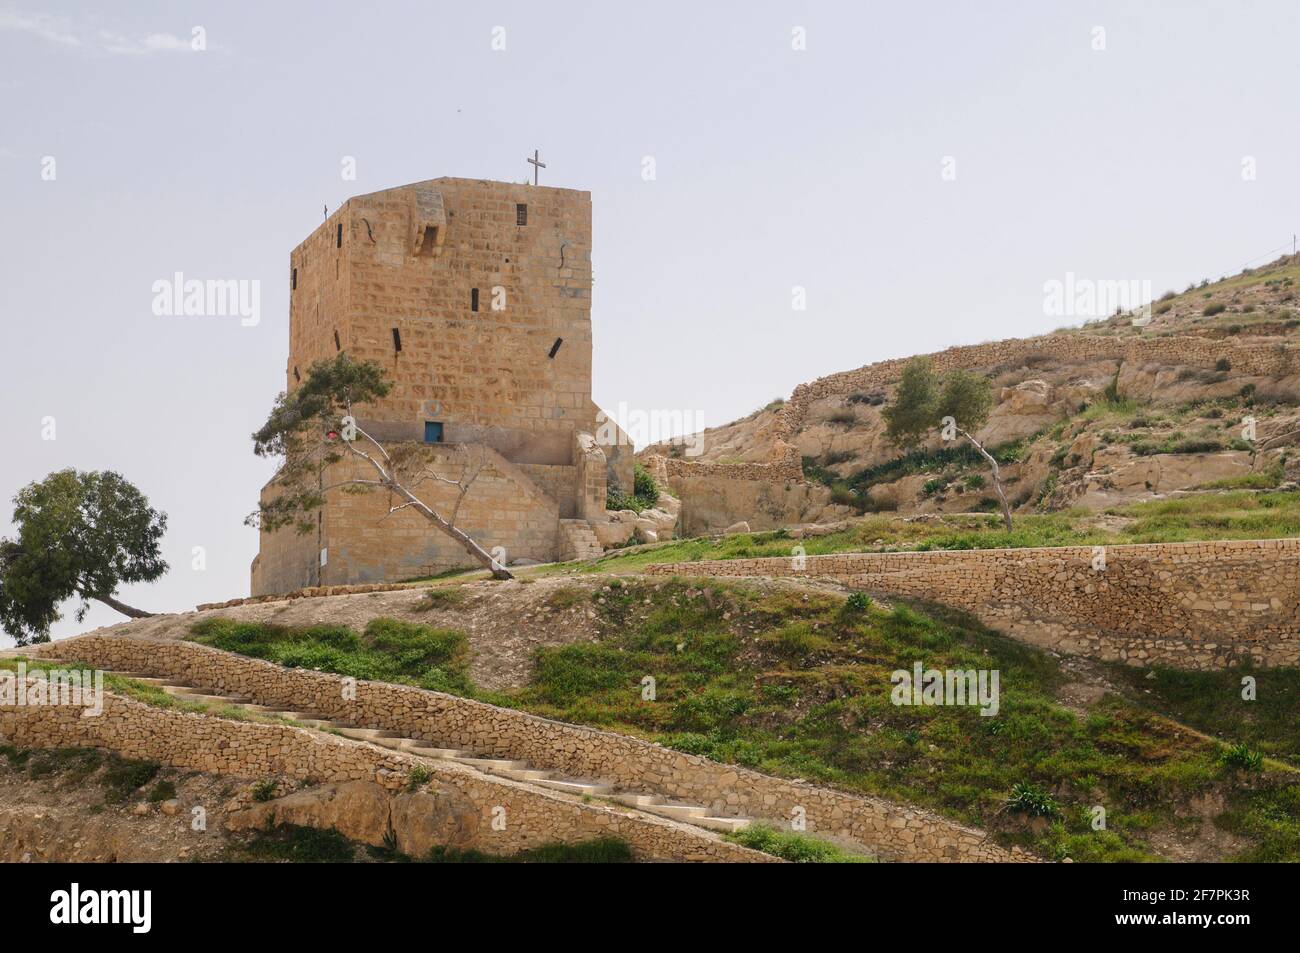 The Women's Tower overlooking Saint Sabbas, known in Syriac as Mar Saba [Marsaba] is a Greek Orthodox monastery overlooking the Kidron Valley at a poi Stock Photo